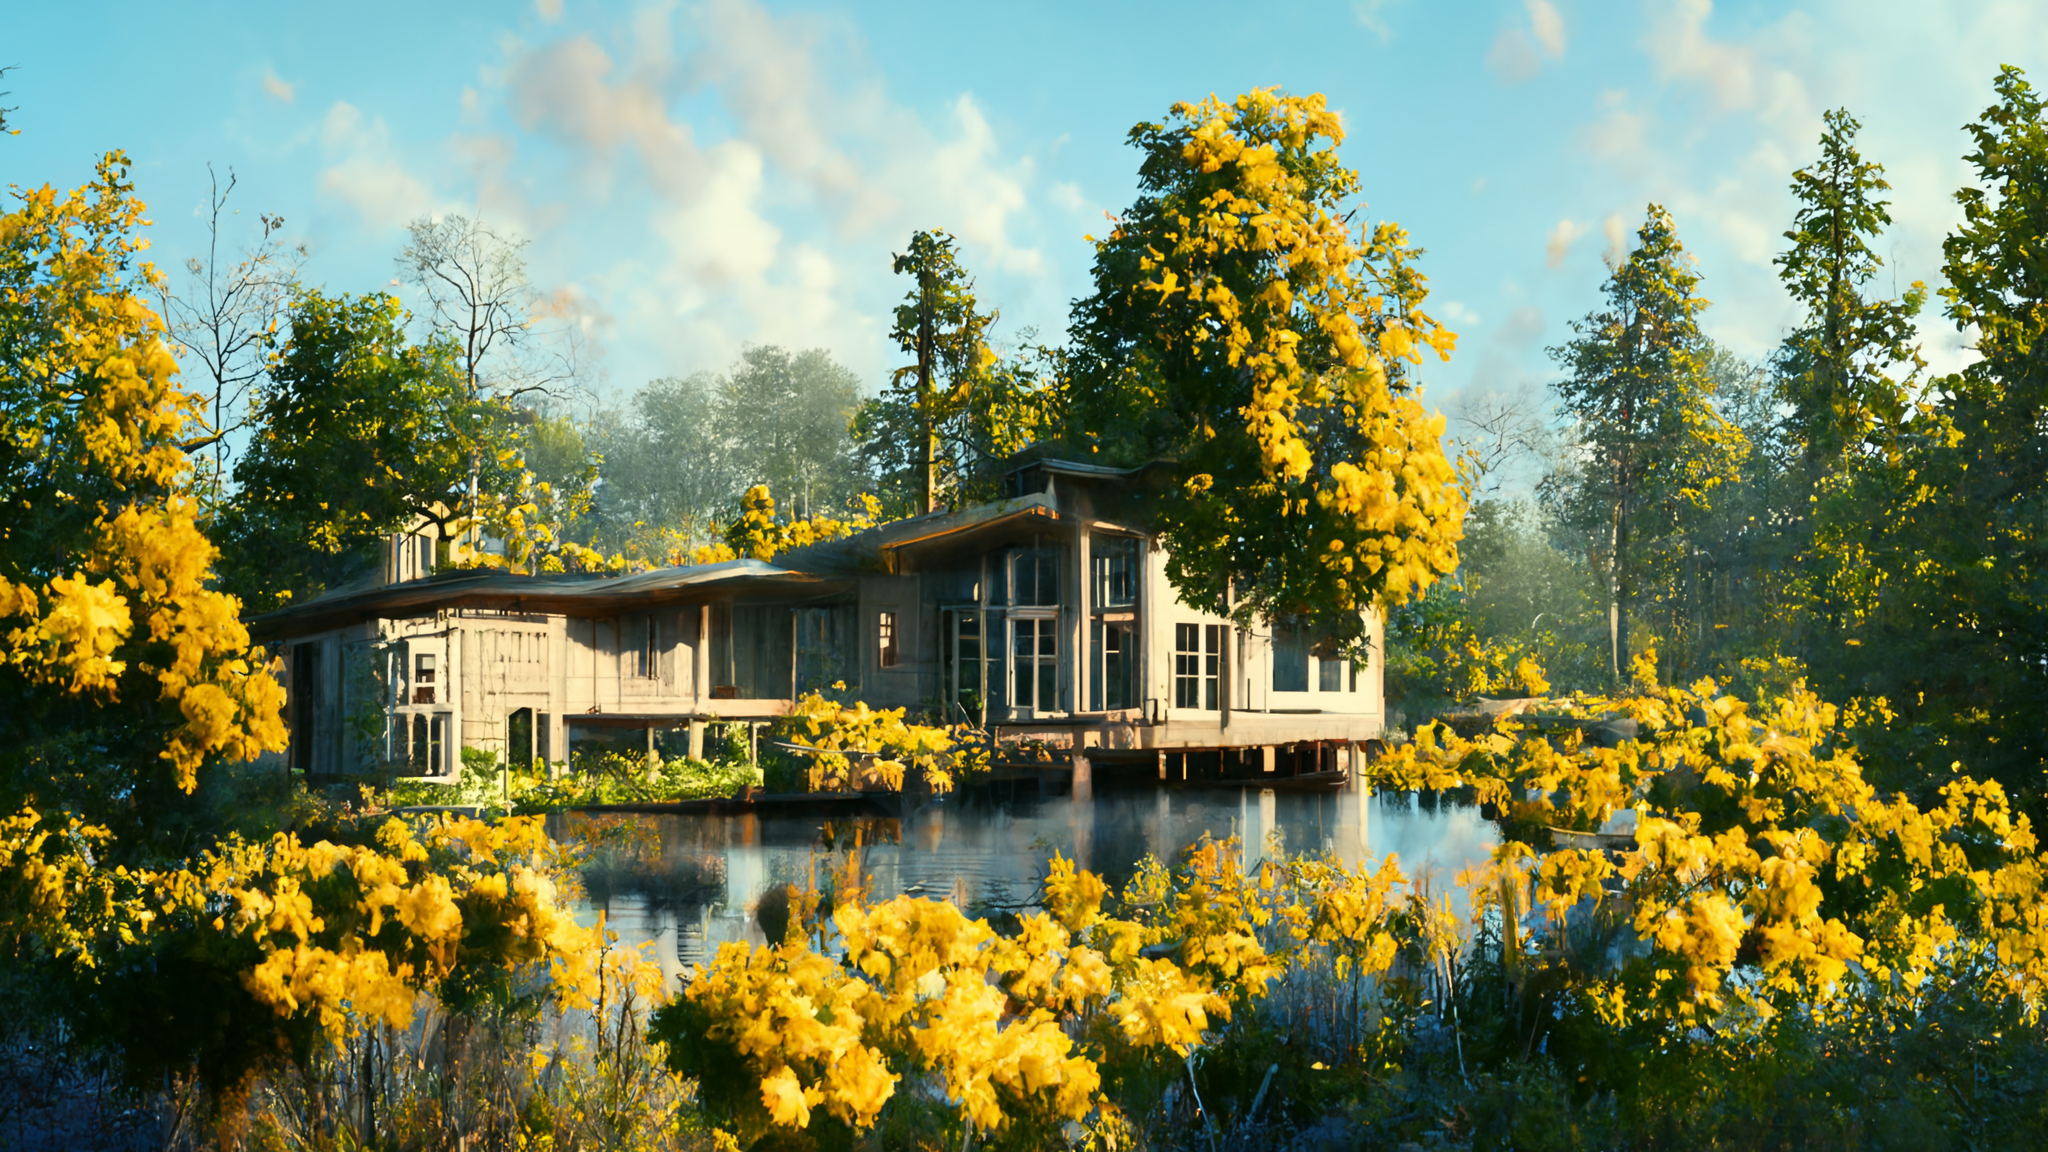 General 2048x1152 landscape forest flowers trees sea lake window house cottage bushes water AI art